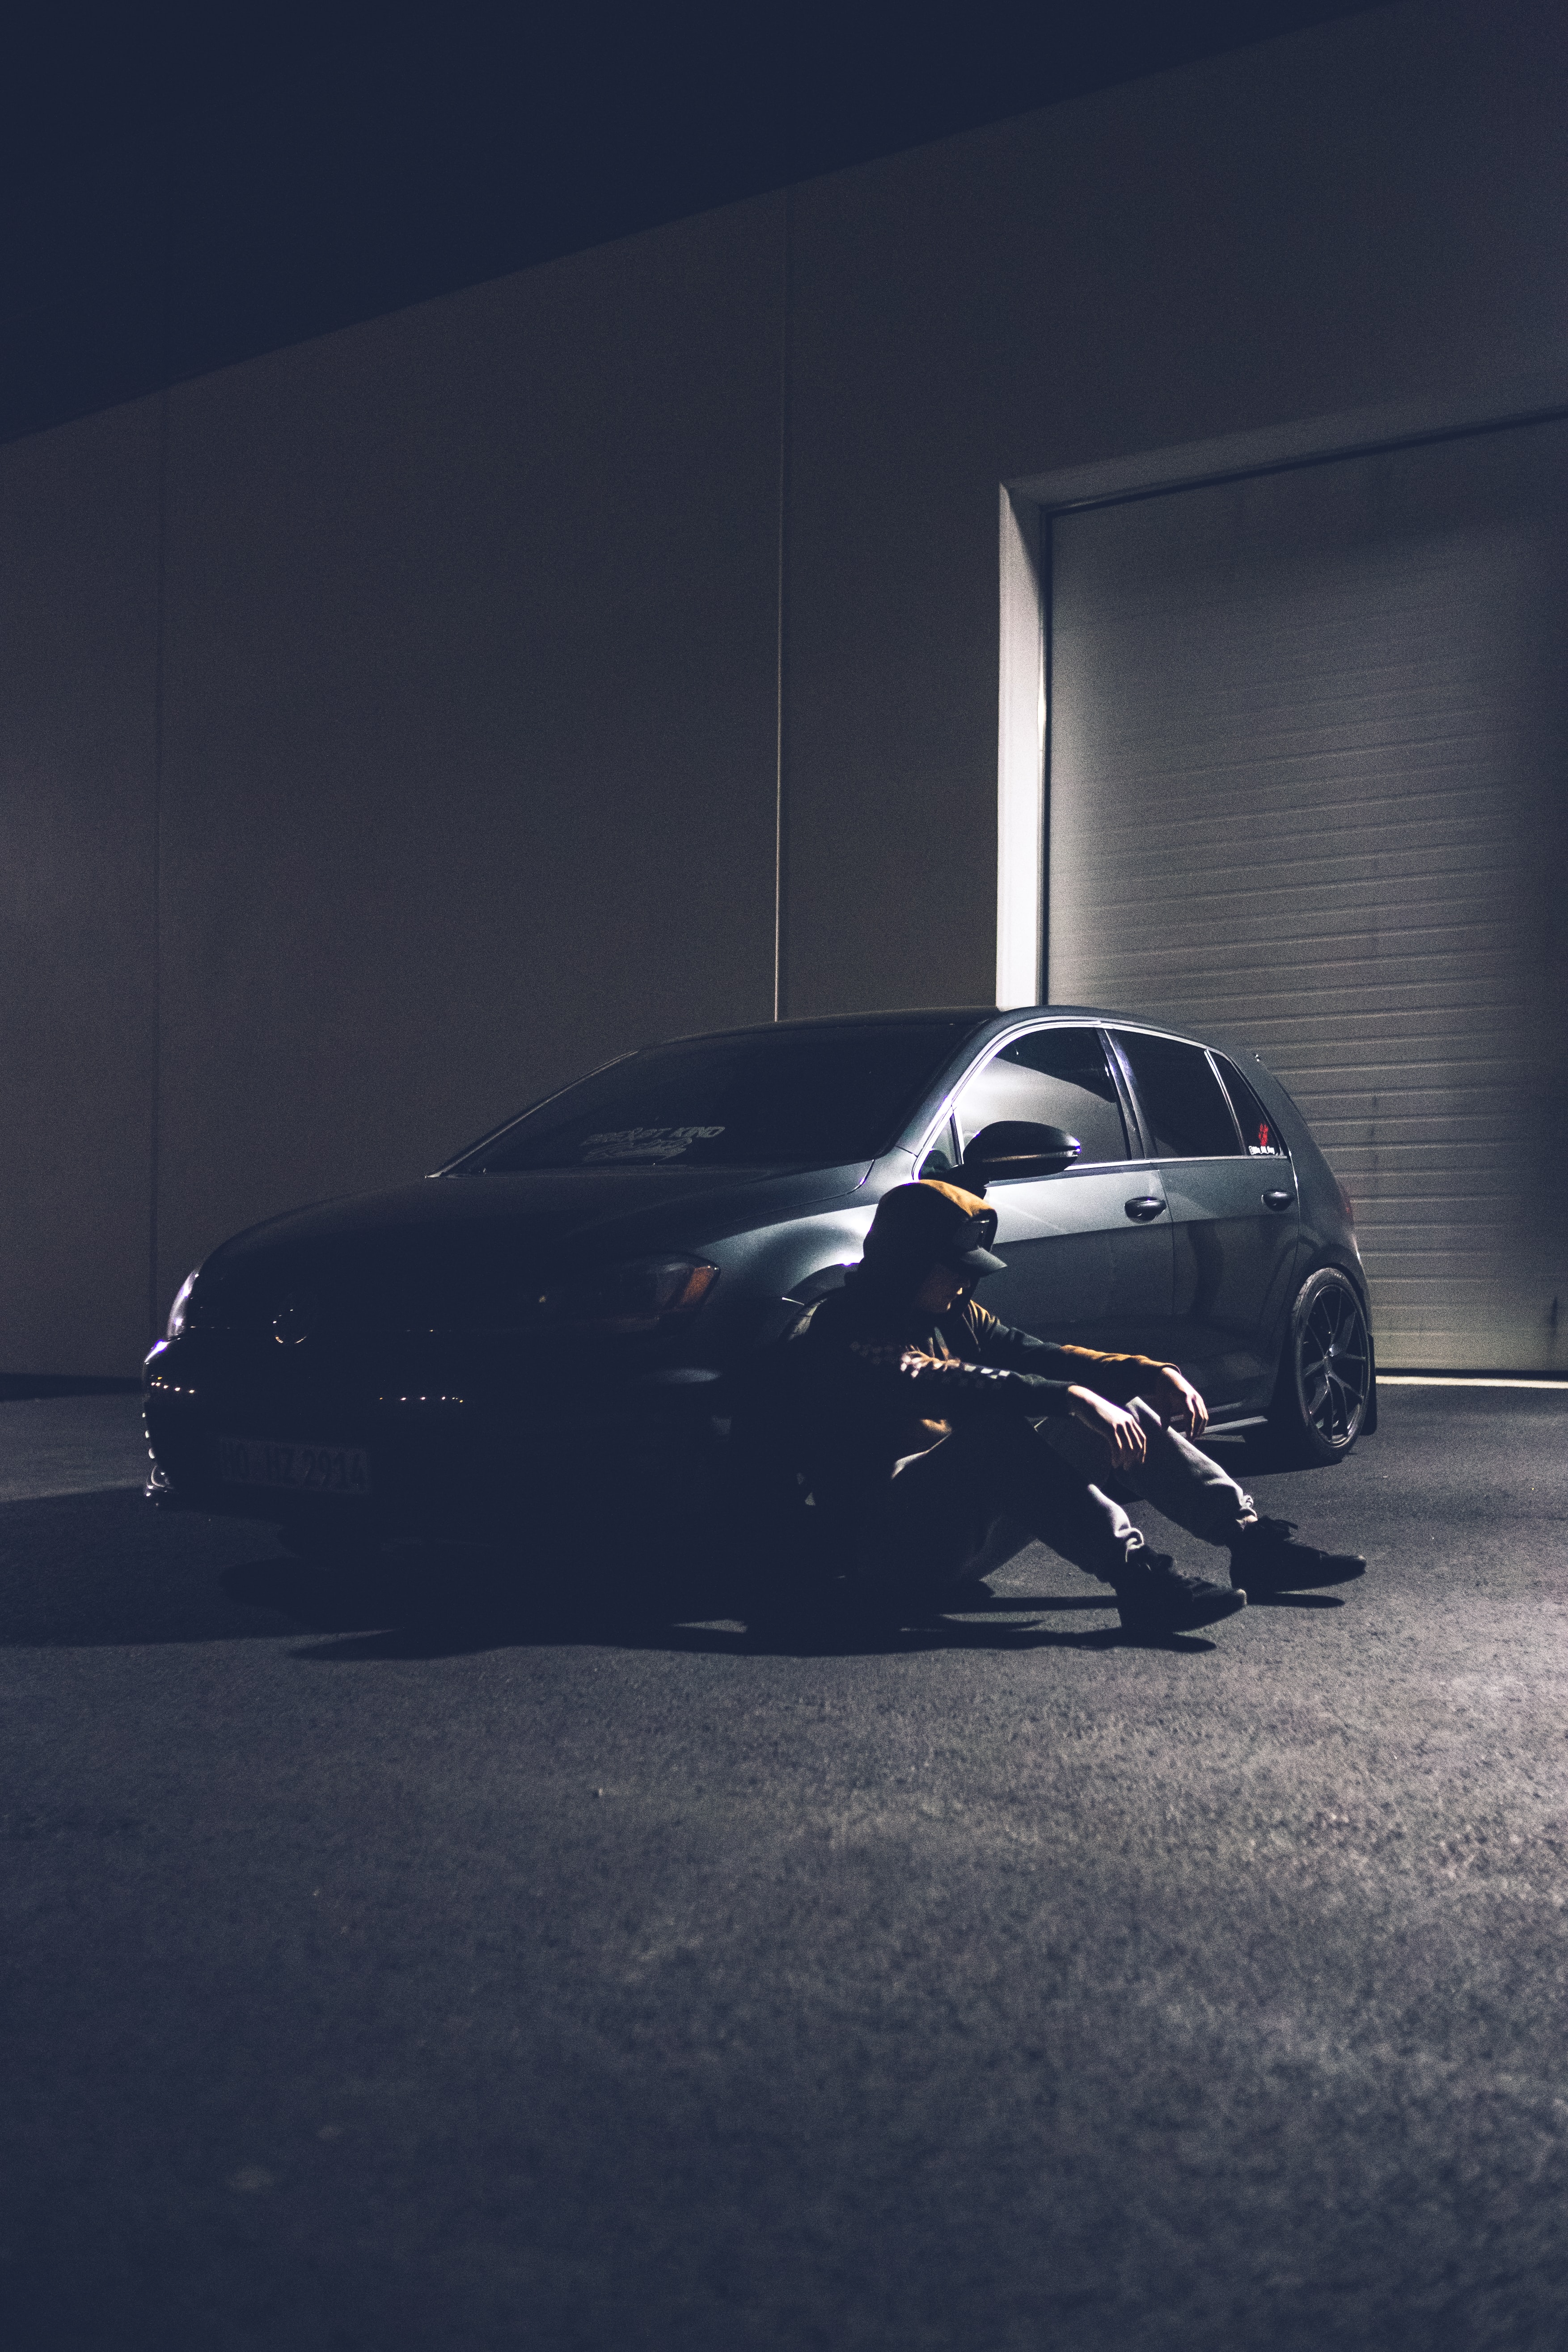 loneliness, alone, sadness, cars, car, machine, cap, lonely, sorrow wallpaper for mobile